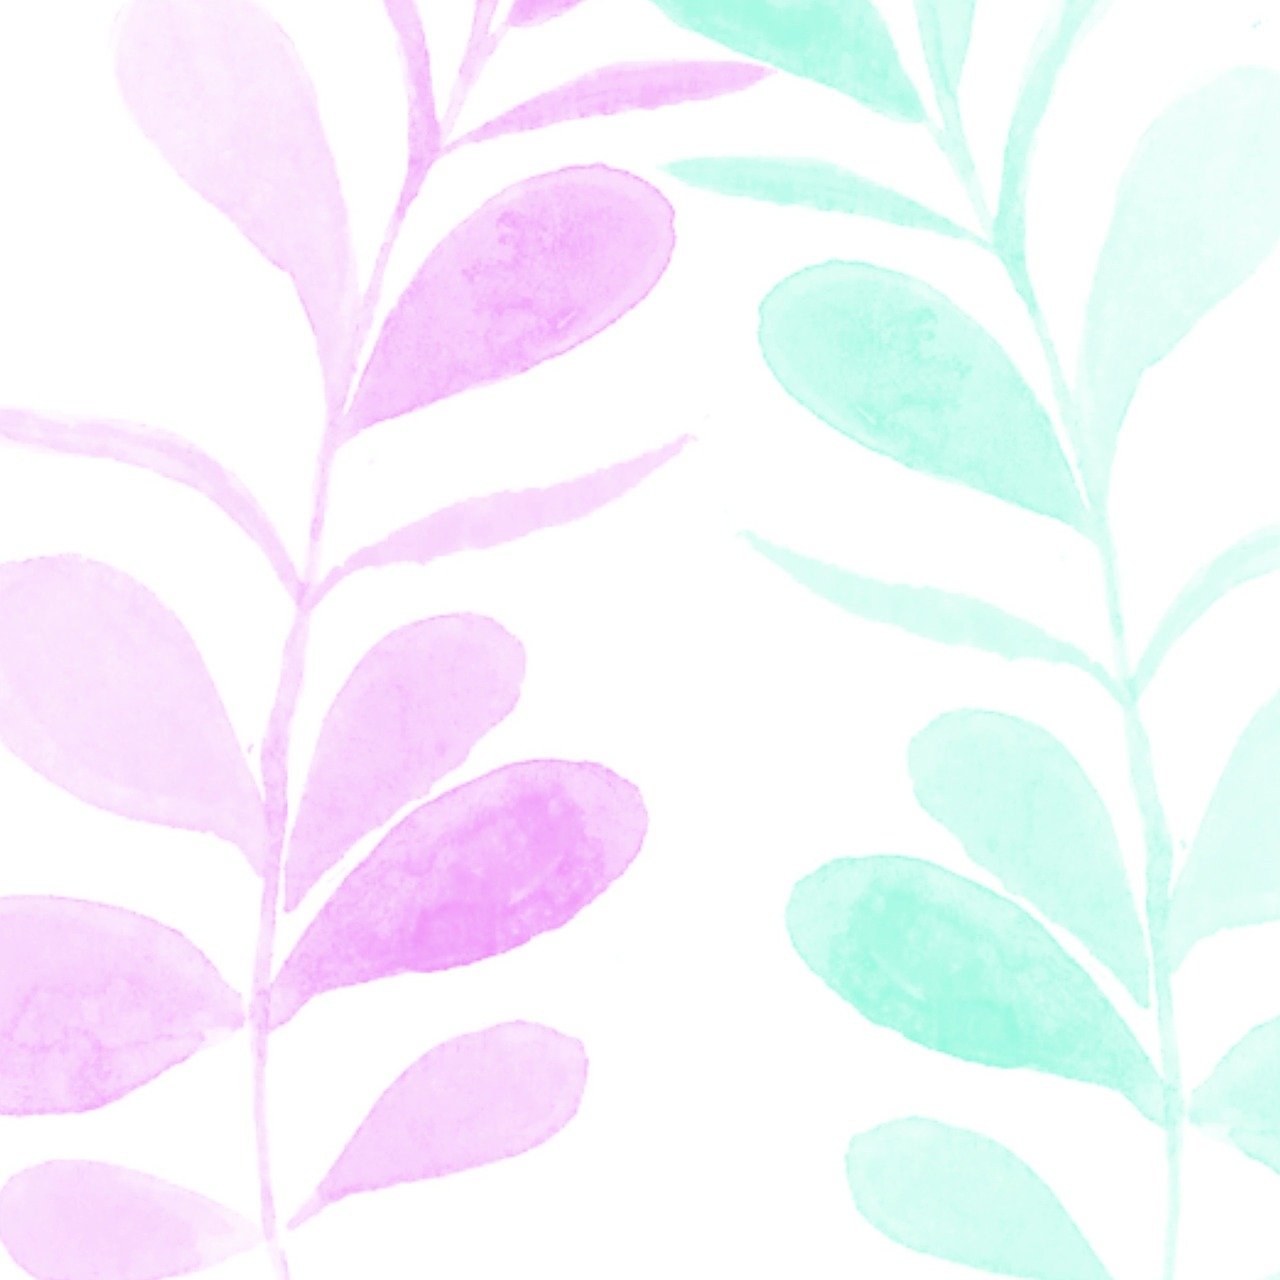 a painting of watercolor leaves on a white background, a watercolor painting, inspired by Masamitsu Ōta, tumblr, visual art, candy colors, background bar, background is purple, wallpaper - 1 0 2 4